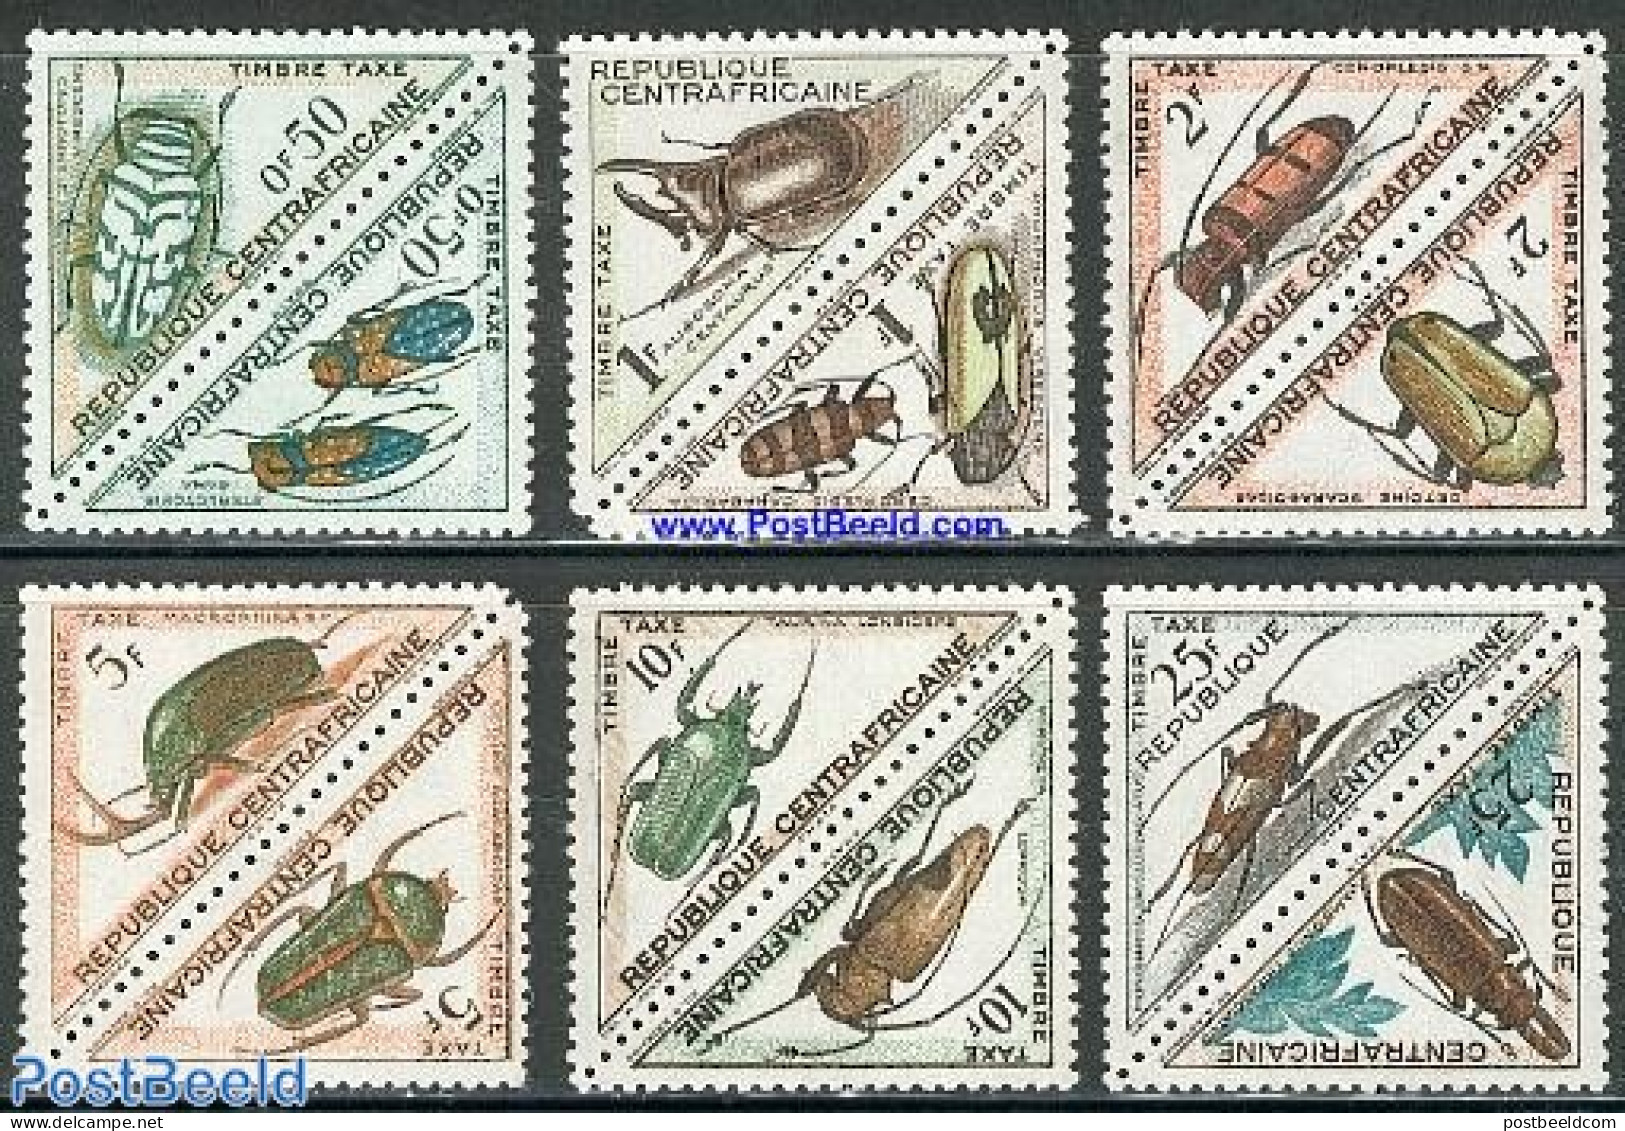 Central Africa 1962 Postage Due, Insects 12v (6x[:]), Mint NH, Nature - Insects - Centrafricaine (République)